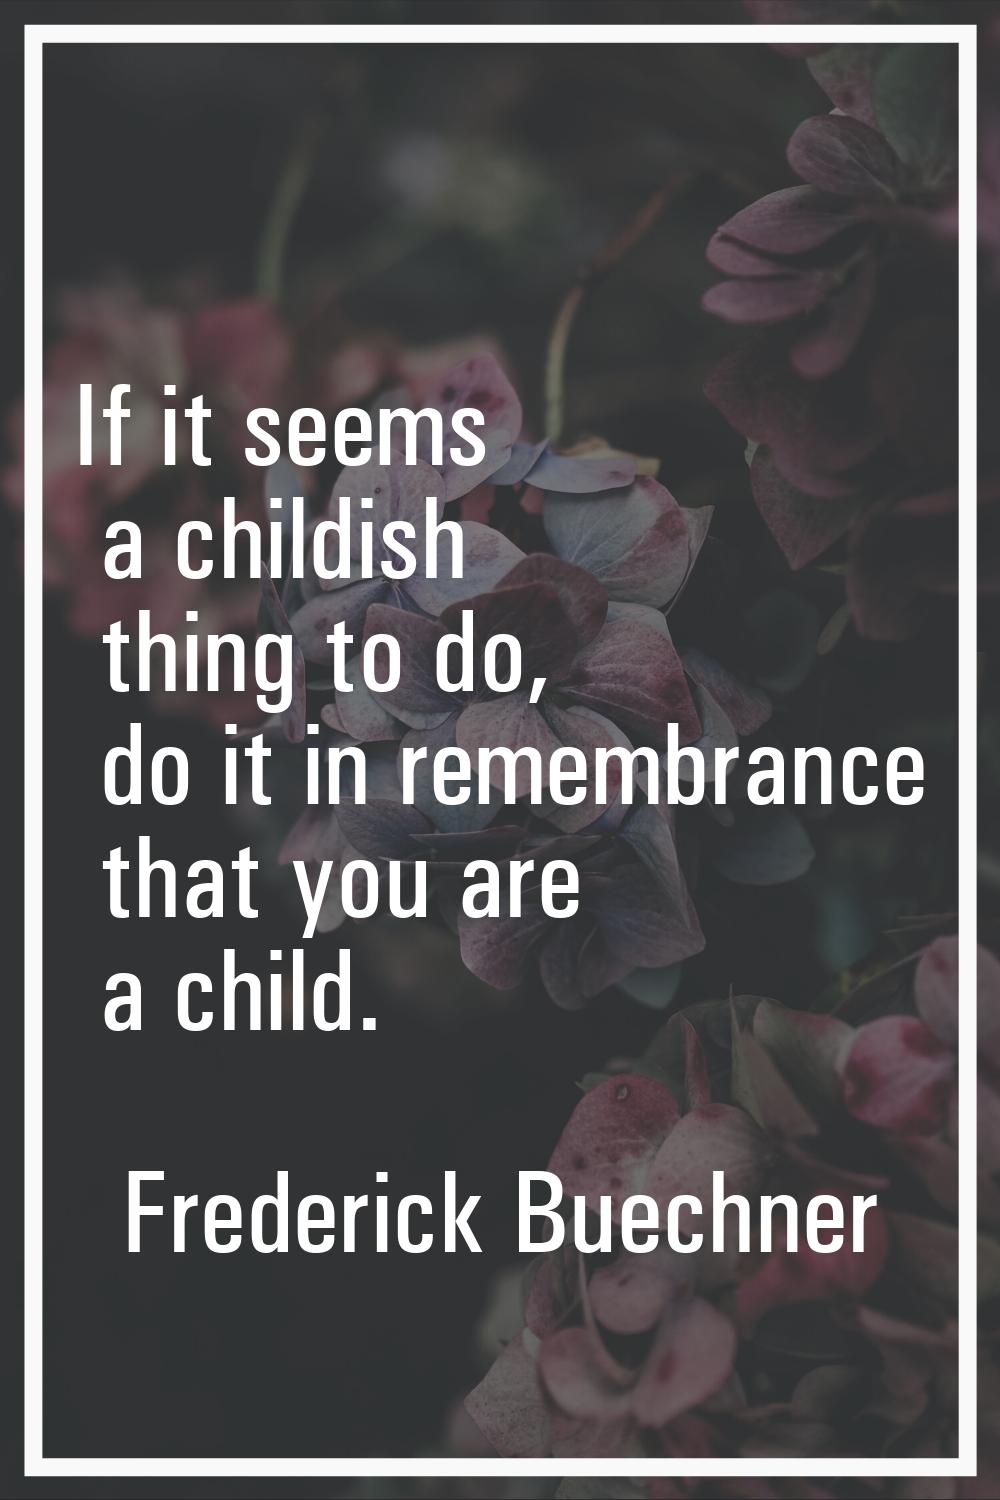 If it seems a childish thing to do, do it in remembrance that you are a child.